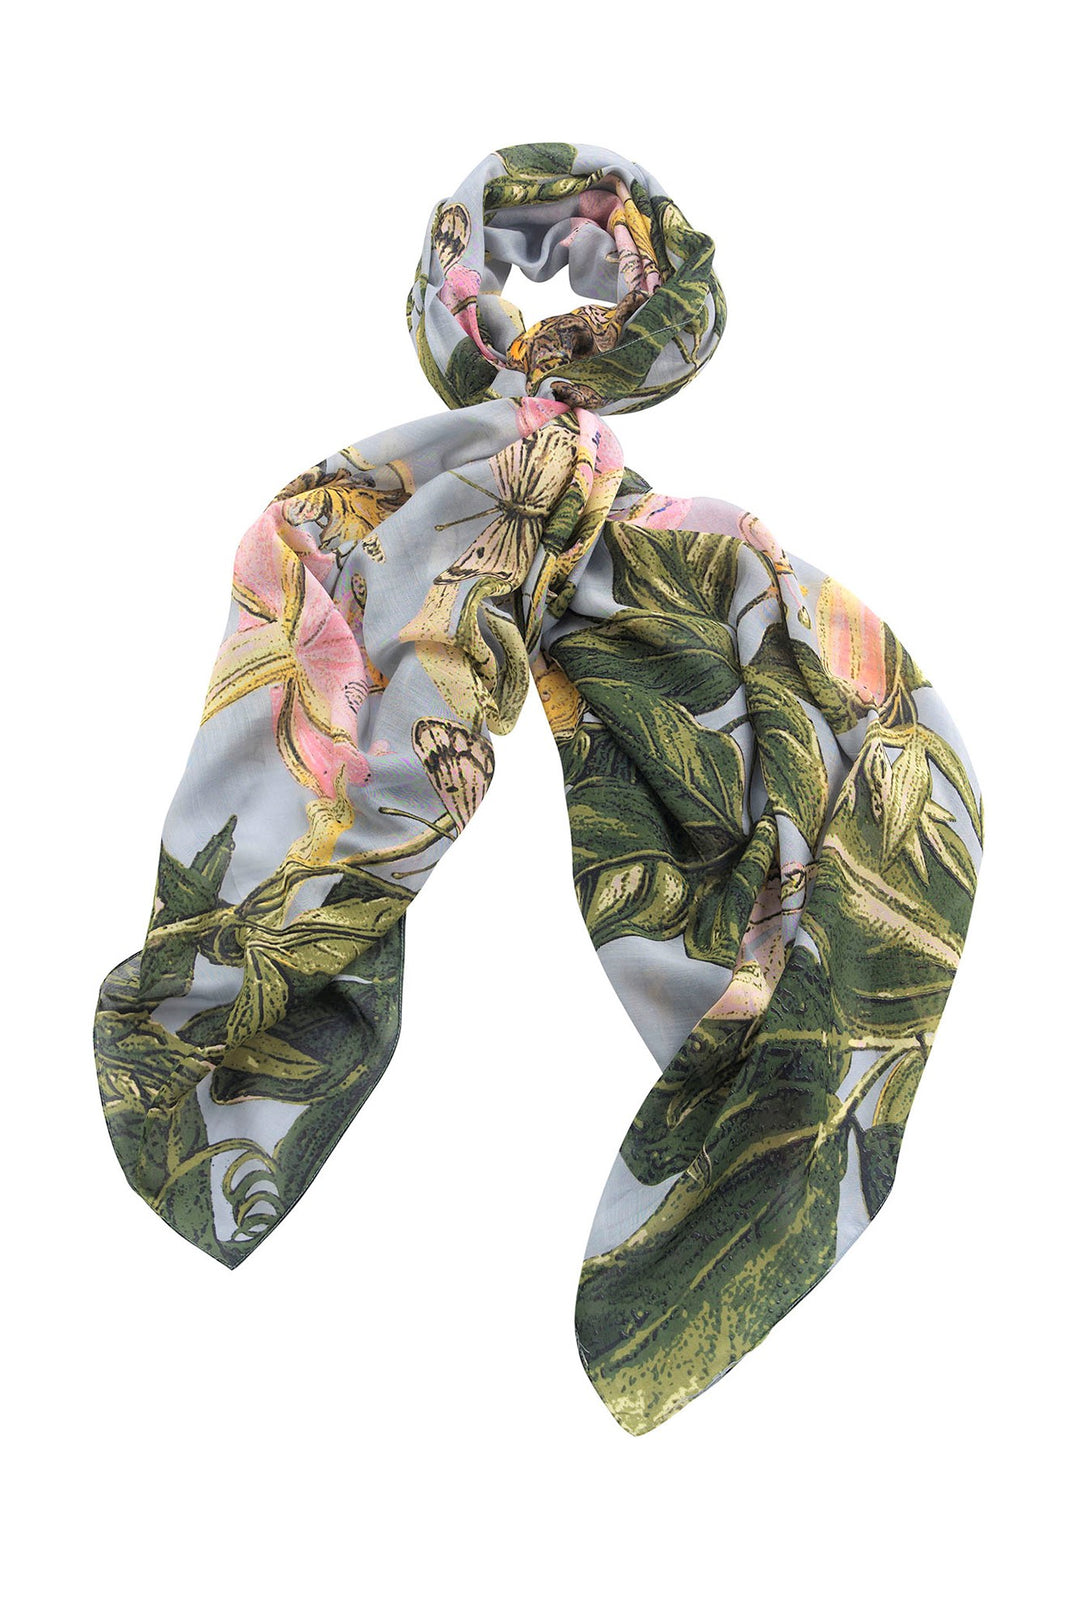 Marianne North Chilli Plant Scarf- Our scarves are a full 100cm x 200cm making them perfect for layering in the winter months or worn as a delicate cover up during the summer seasons. 